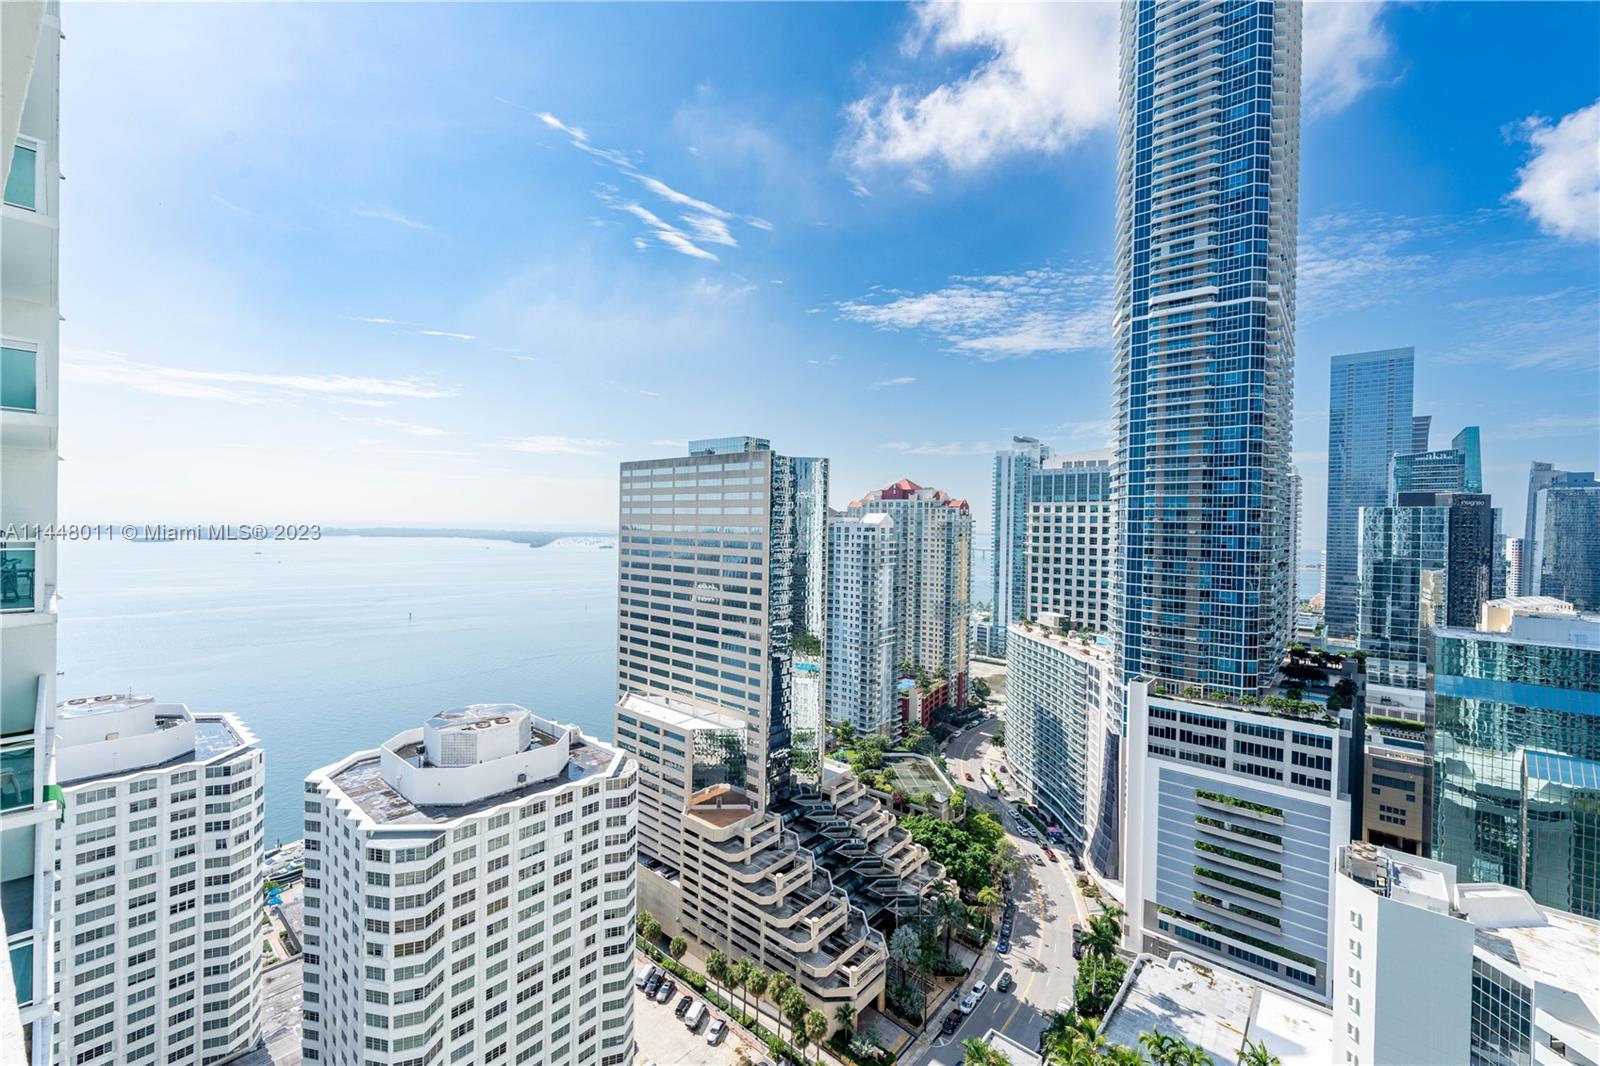 Welcome to this fantastic 2-bedroom, 2-bathroom condo in the heart of Brickell. Enjoy stunning water views from both the open balcony and master bedroom. The open-layout kitchen features stainless steel appliances, granite countertops, and Rectified polished porcelain tile making it perfect for everyday living. Residents here have access to great amenities, including a pool, gym, jacuzzi, steam room, theater room, business center, party room, pool table, and more. Plus, there are no rental restrictions, making it an ideal choice for both homeowners and investors. Don't miss out on this opportunity, and schedule a showing today!